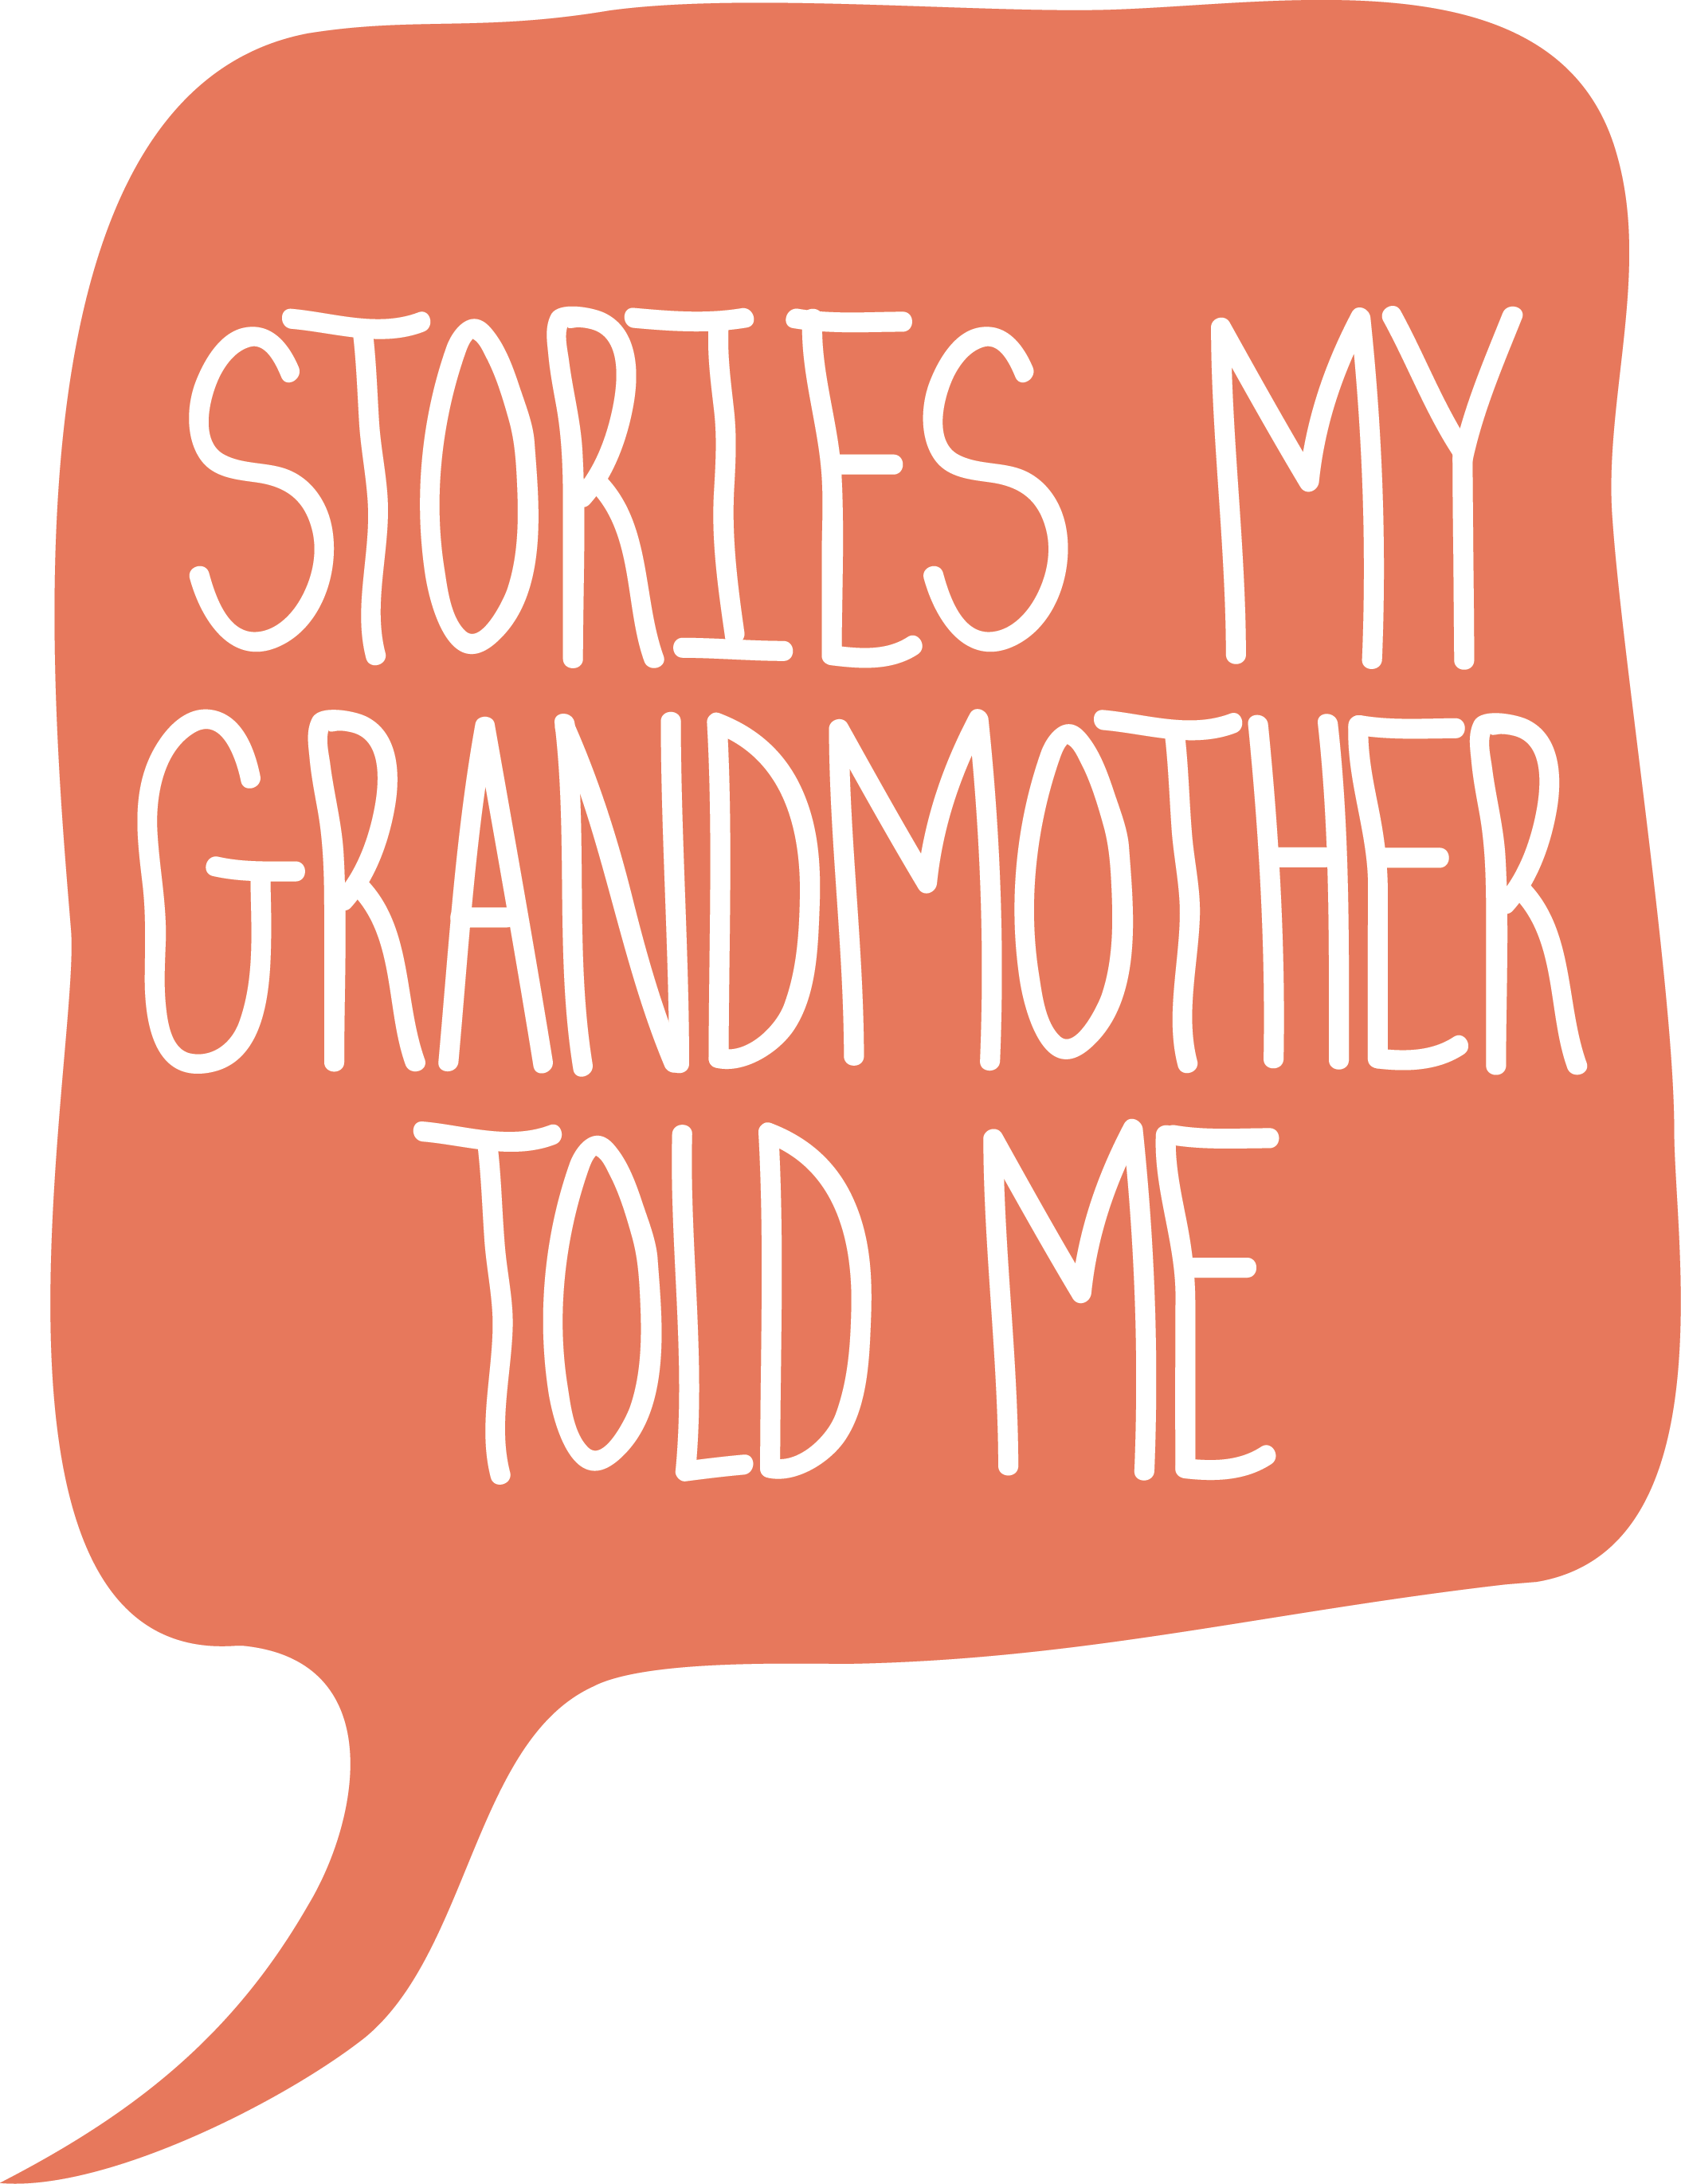 Stories My Grandmother Told Me